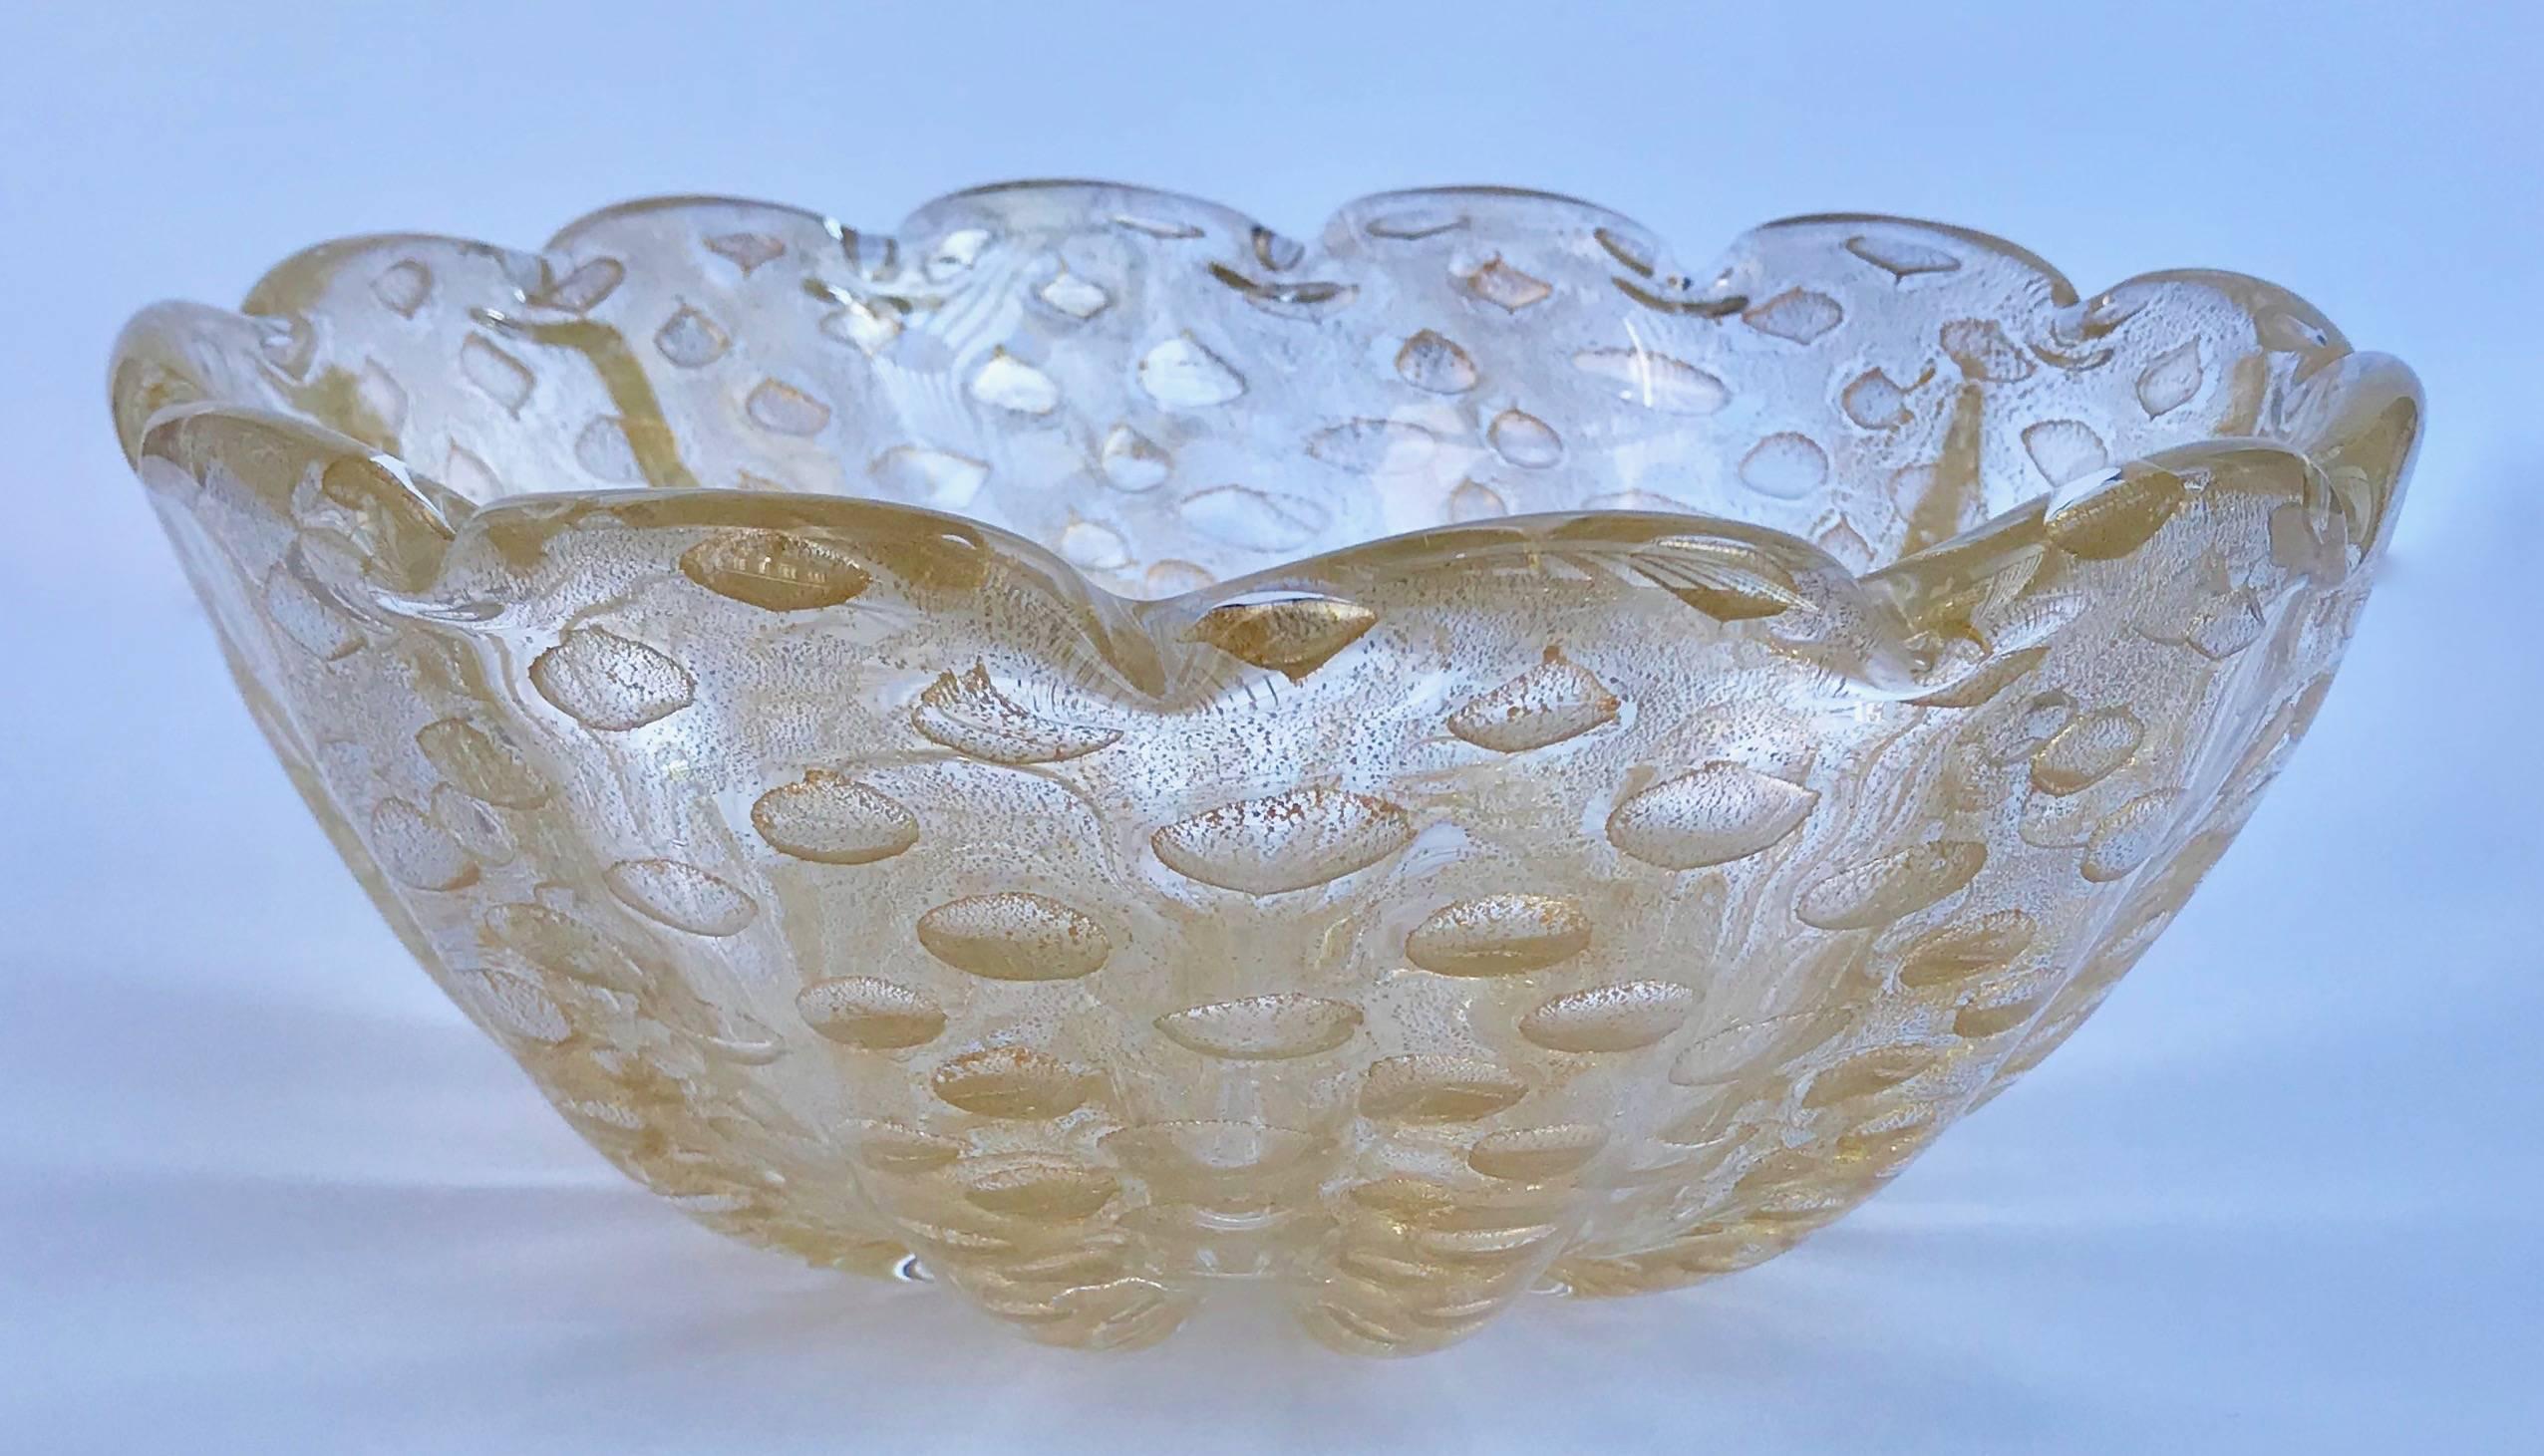 A large and beautifully crafted Italian Murano glass bowl in clear glass with gold inclusions in the bullicante technique attributed to Barovier. Thick glass ribs accentuate beautiful encased in gold control bubbles with a scalloped detail at the